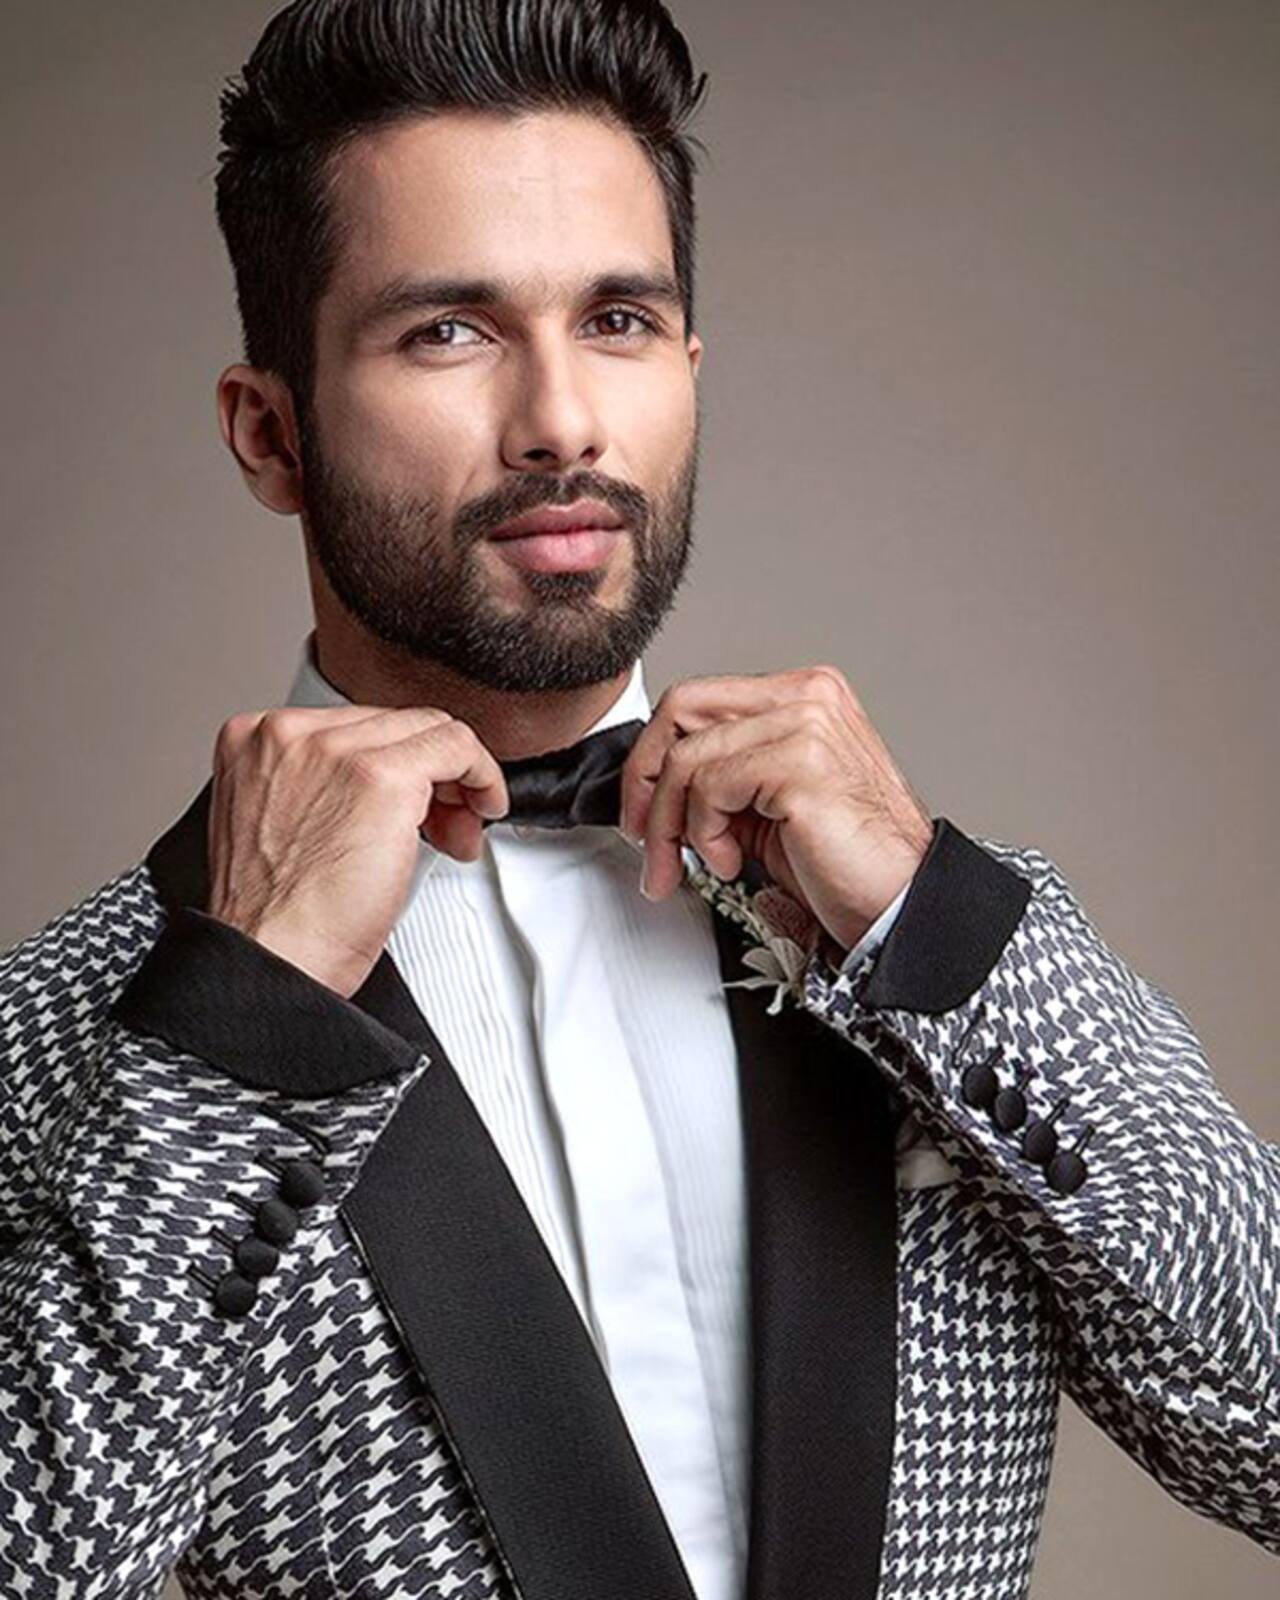 Shahid Kapoor is sure that one of his girlfriends cheated on him, while ...